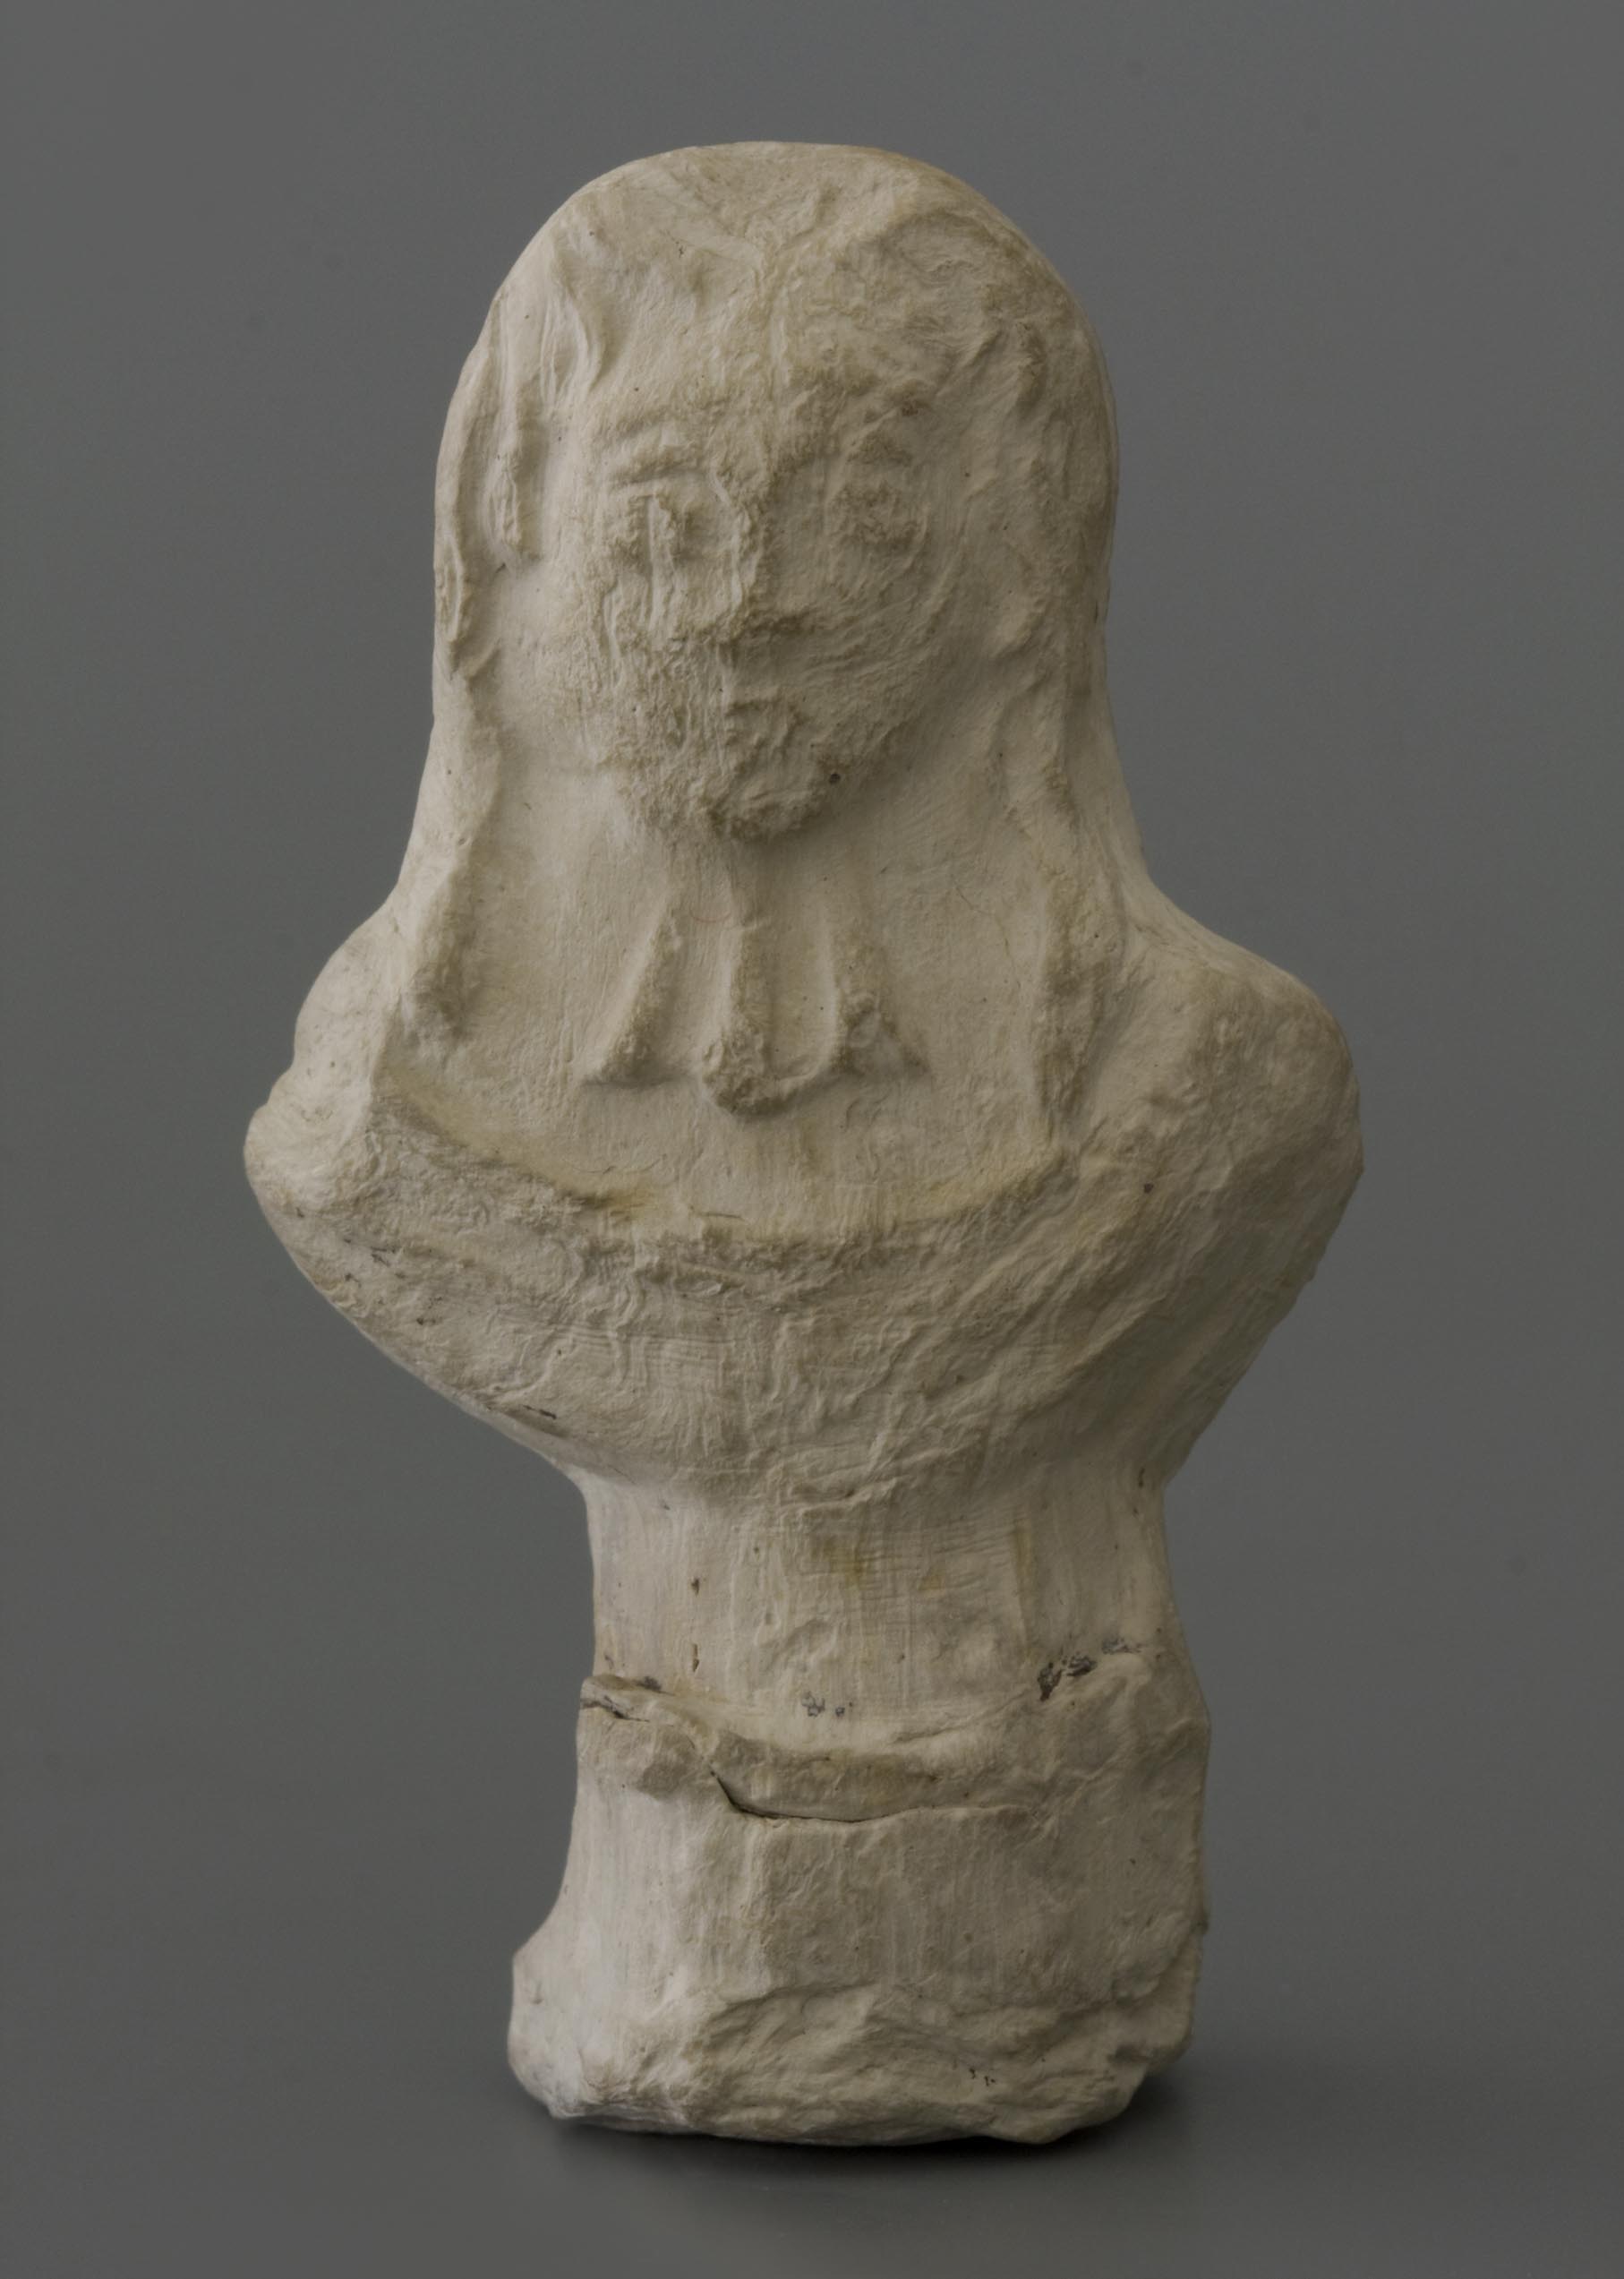 13-18.695-pipeclay-figurine-bust-1